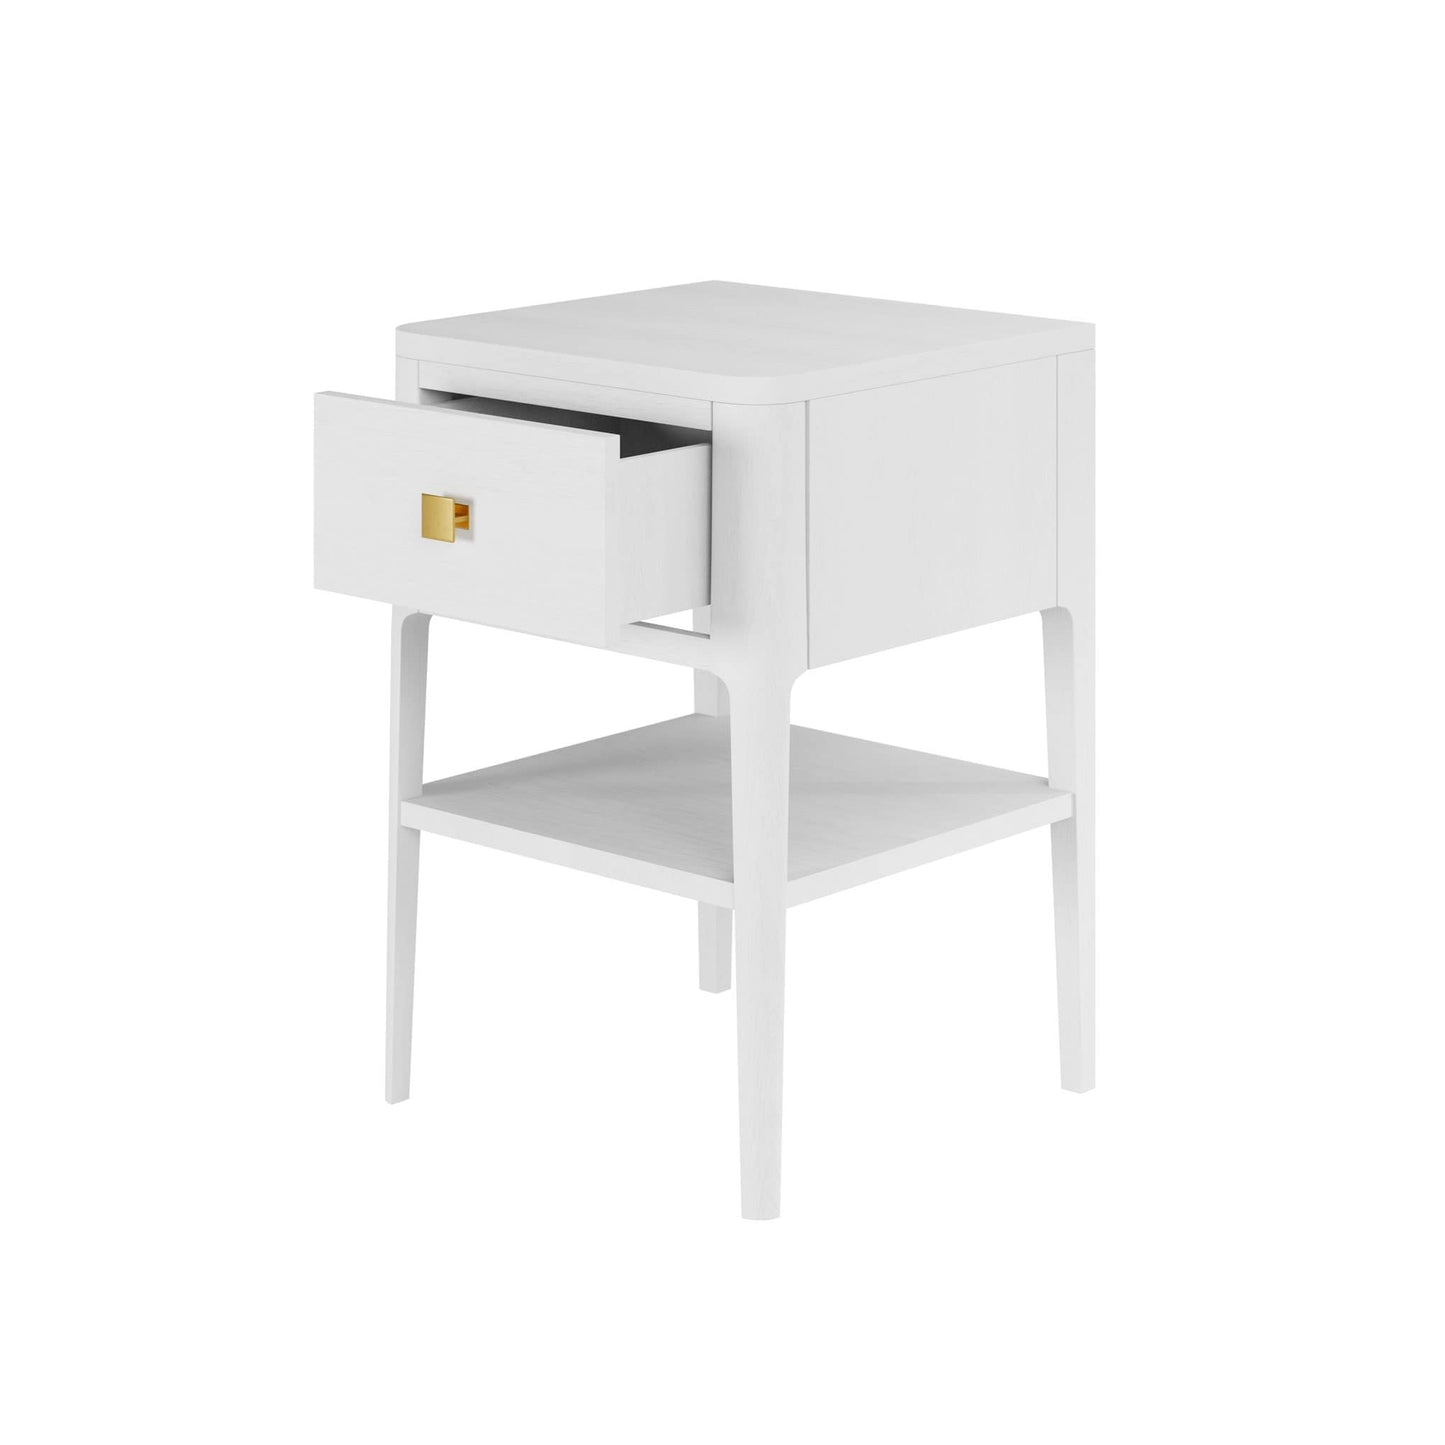 White Abberley One Drawer Bedside Table